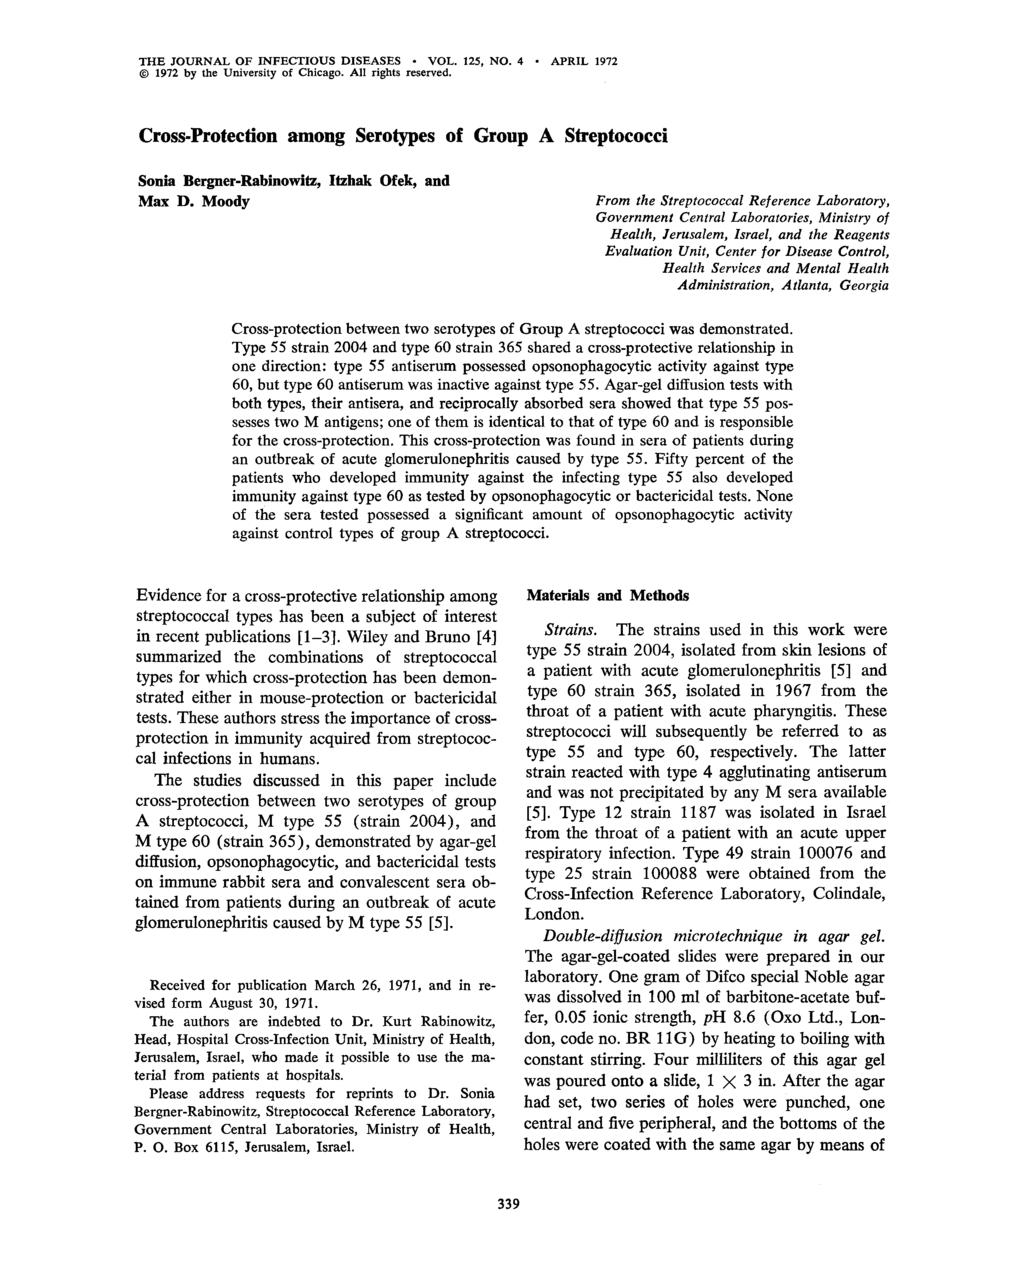 THE JOURNAL OF INFECTIOUS DISEASES VOL. 125 NO.4 APRIL 1972 1972 by the University of Chicago. All rights reserved.